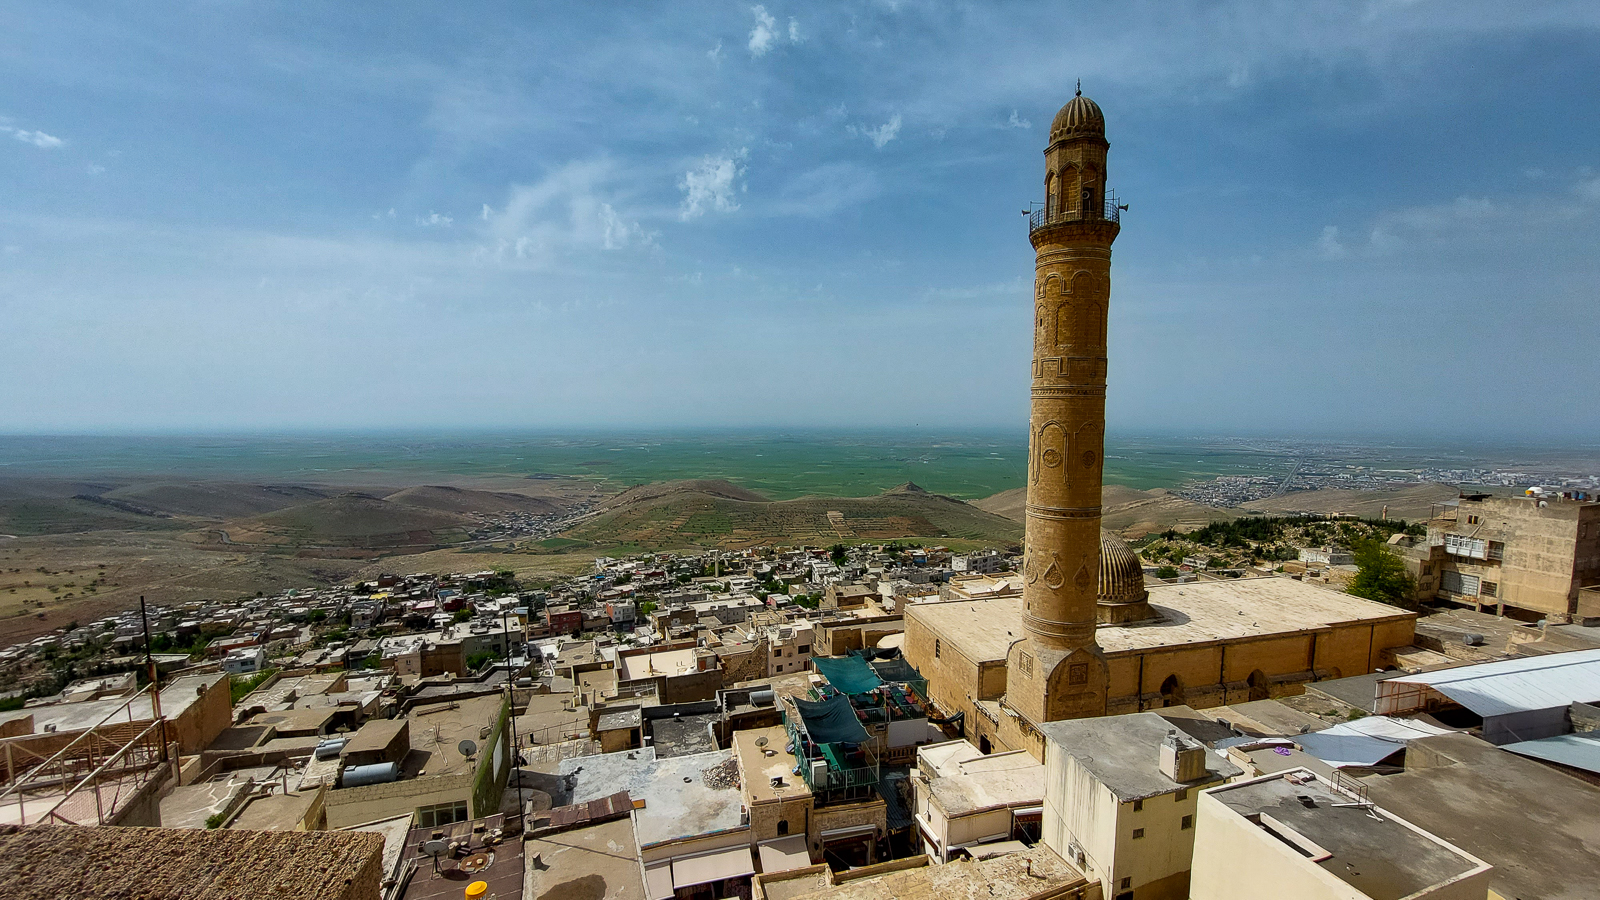 <span  class="uc_style_uc_tiles_grid_image_elementor_uc_items_attribute_title" style="color:#ffffff;">one of the best views you can imagine (over Mardin)!</span>